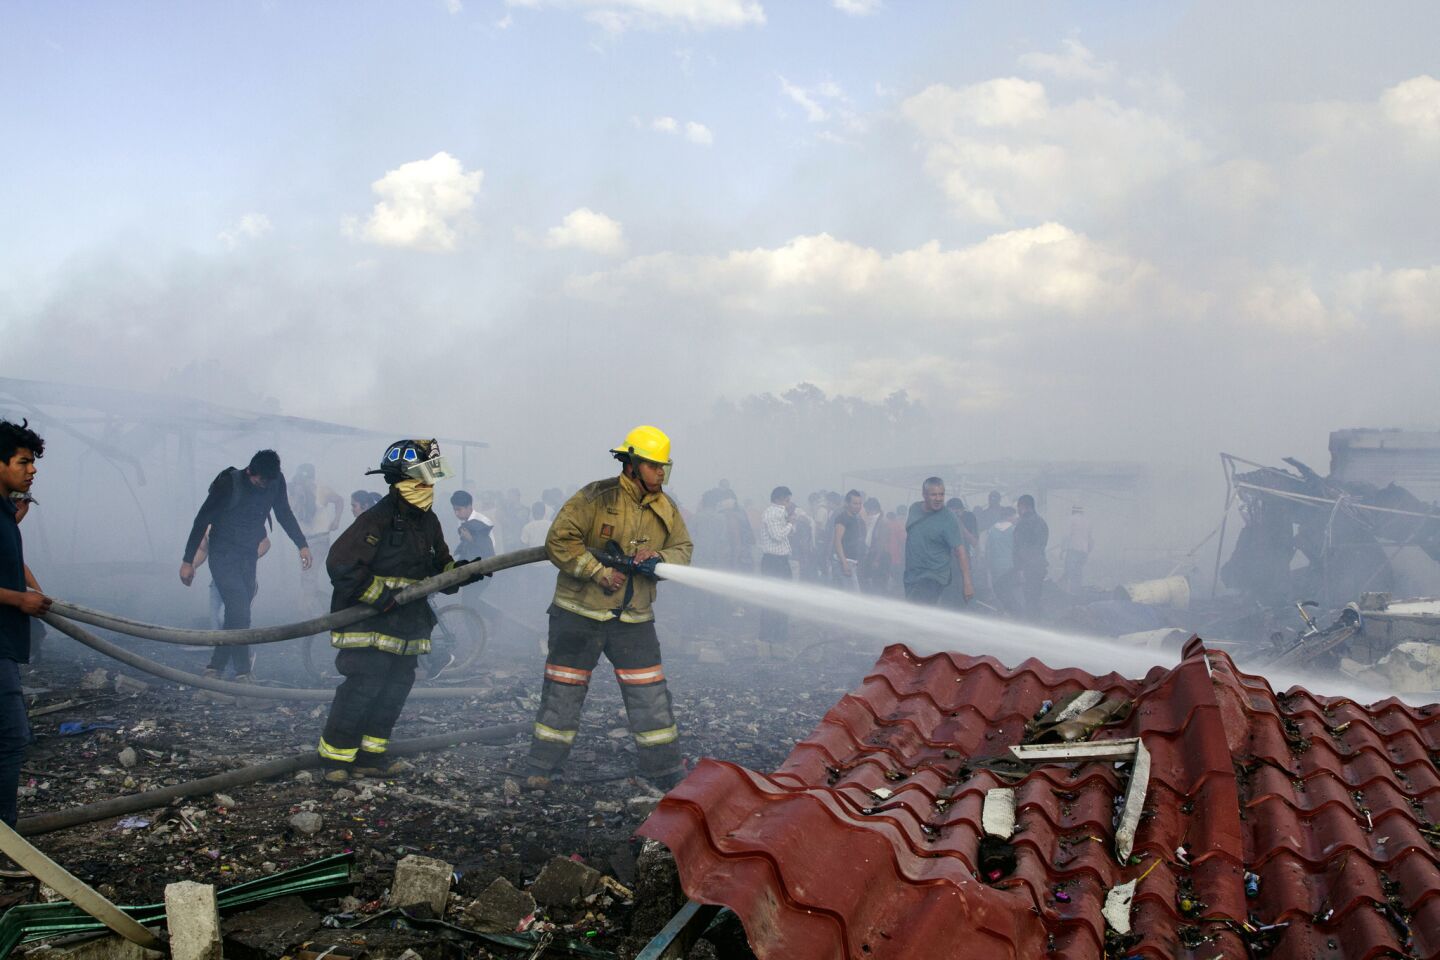 Firefighters put out embers amid the debris of the fireworks market.